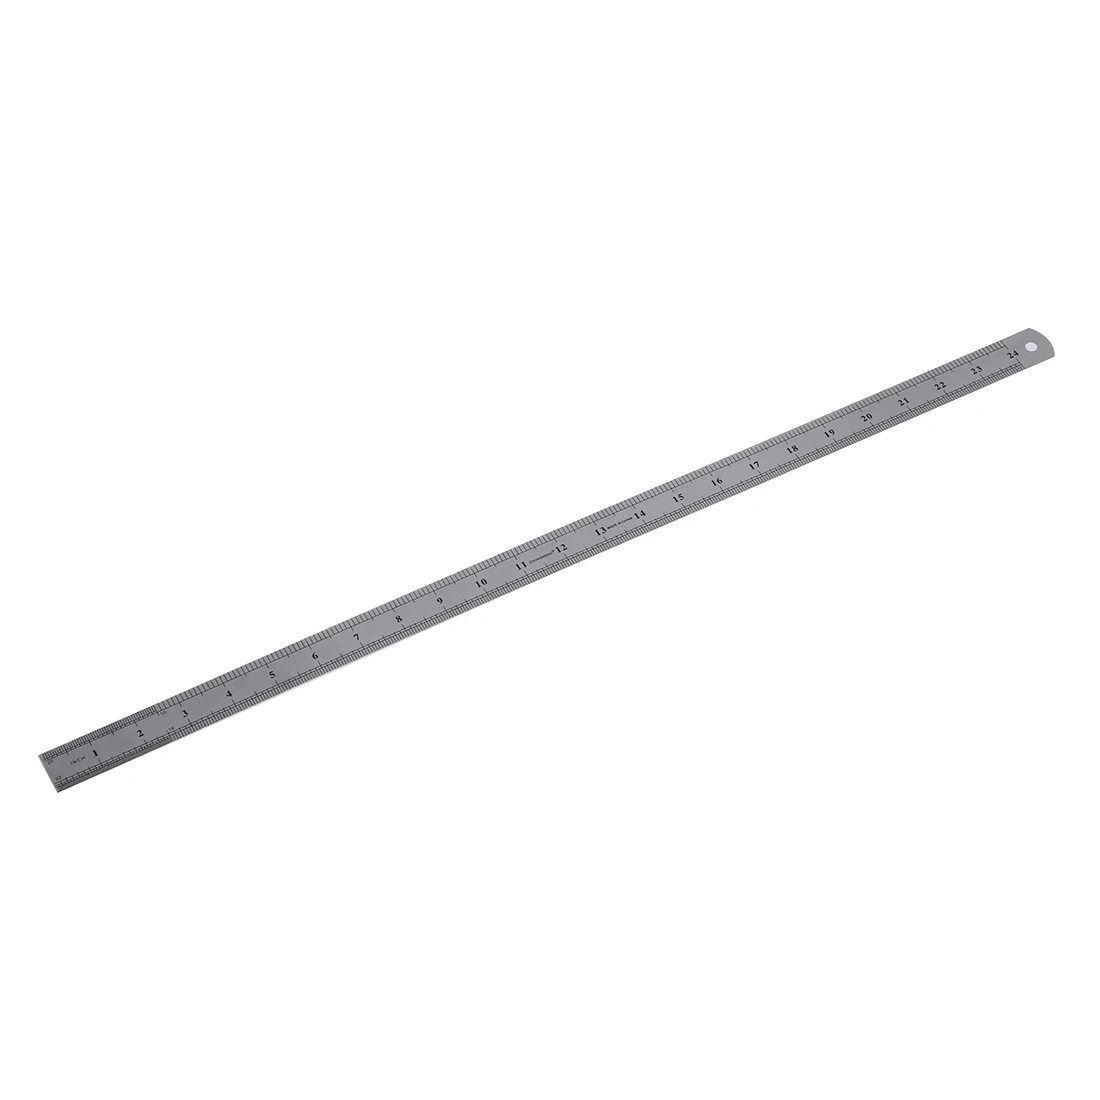 

PPYY NEW -Stainless Steel 60cm 23.6 Inch Measuring Long Straight Ruler